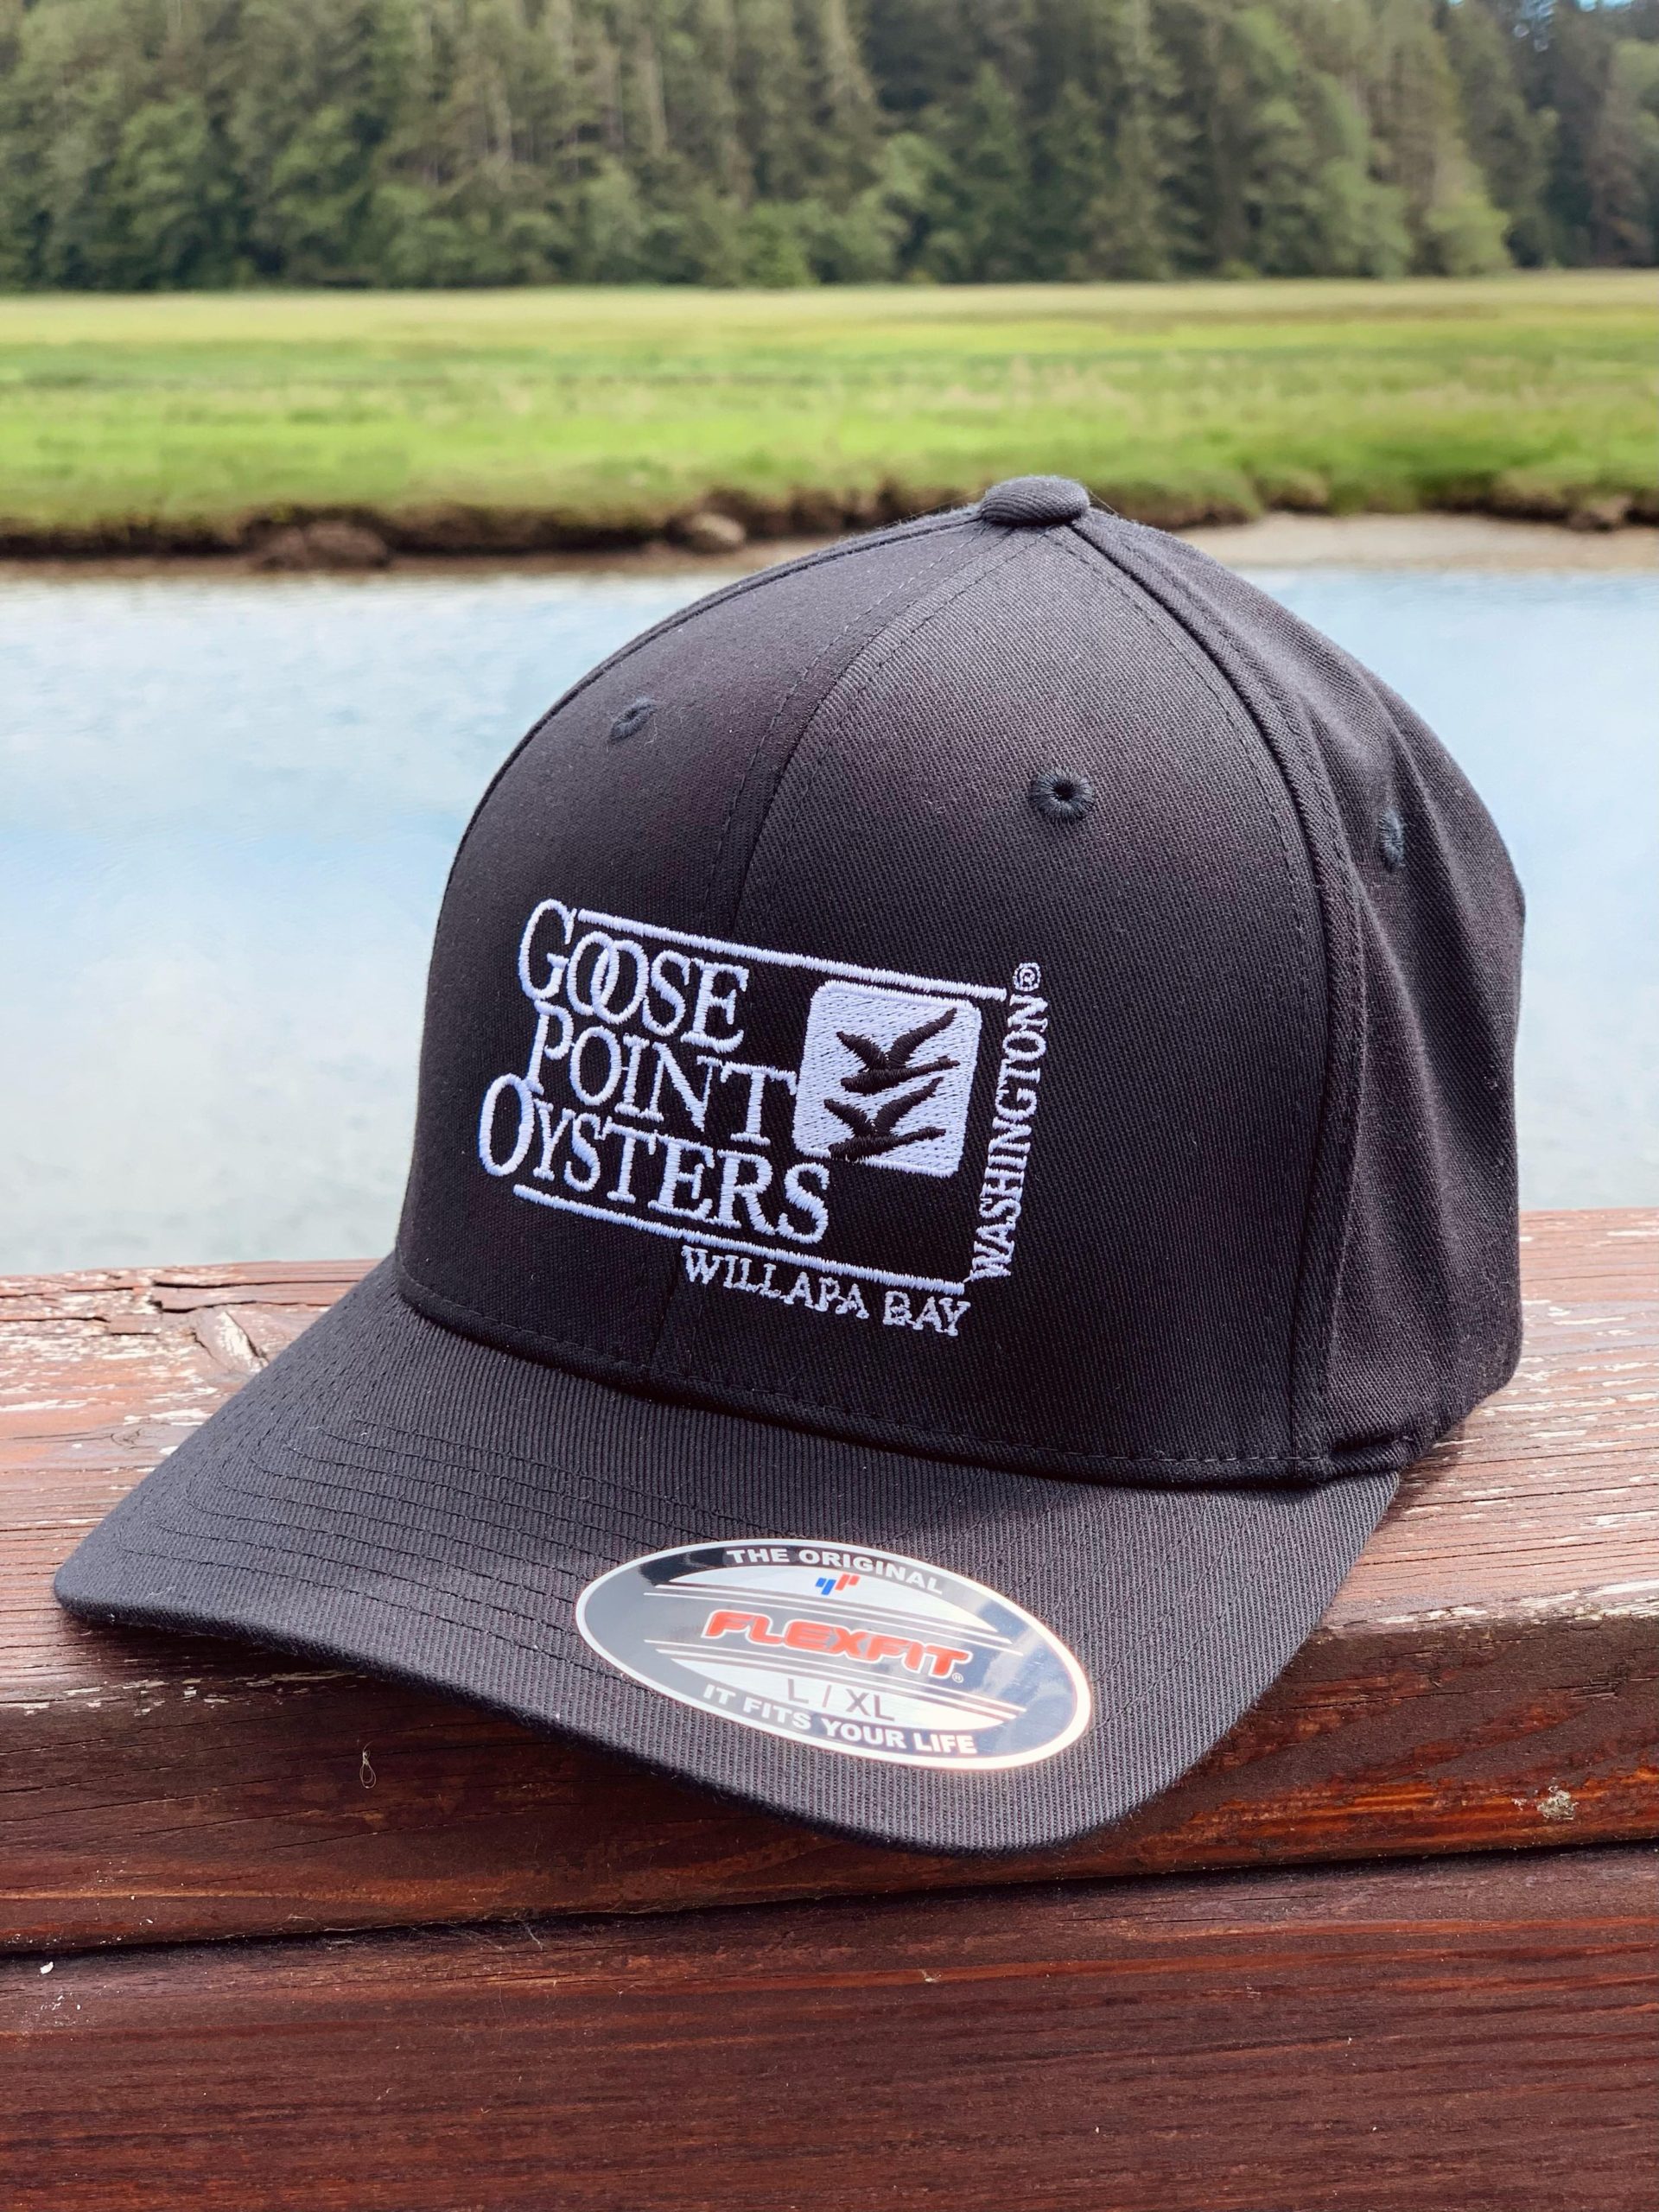 Goose Point Oysters Flex - Oystery Hat Farm & Shellfish Fit Point Goose